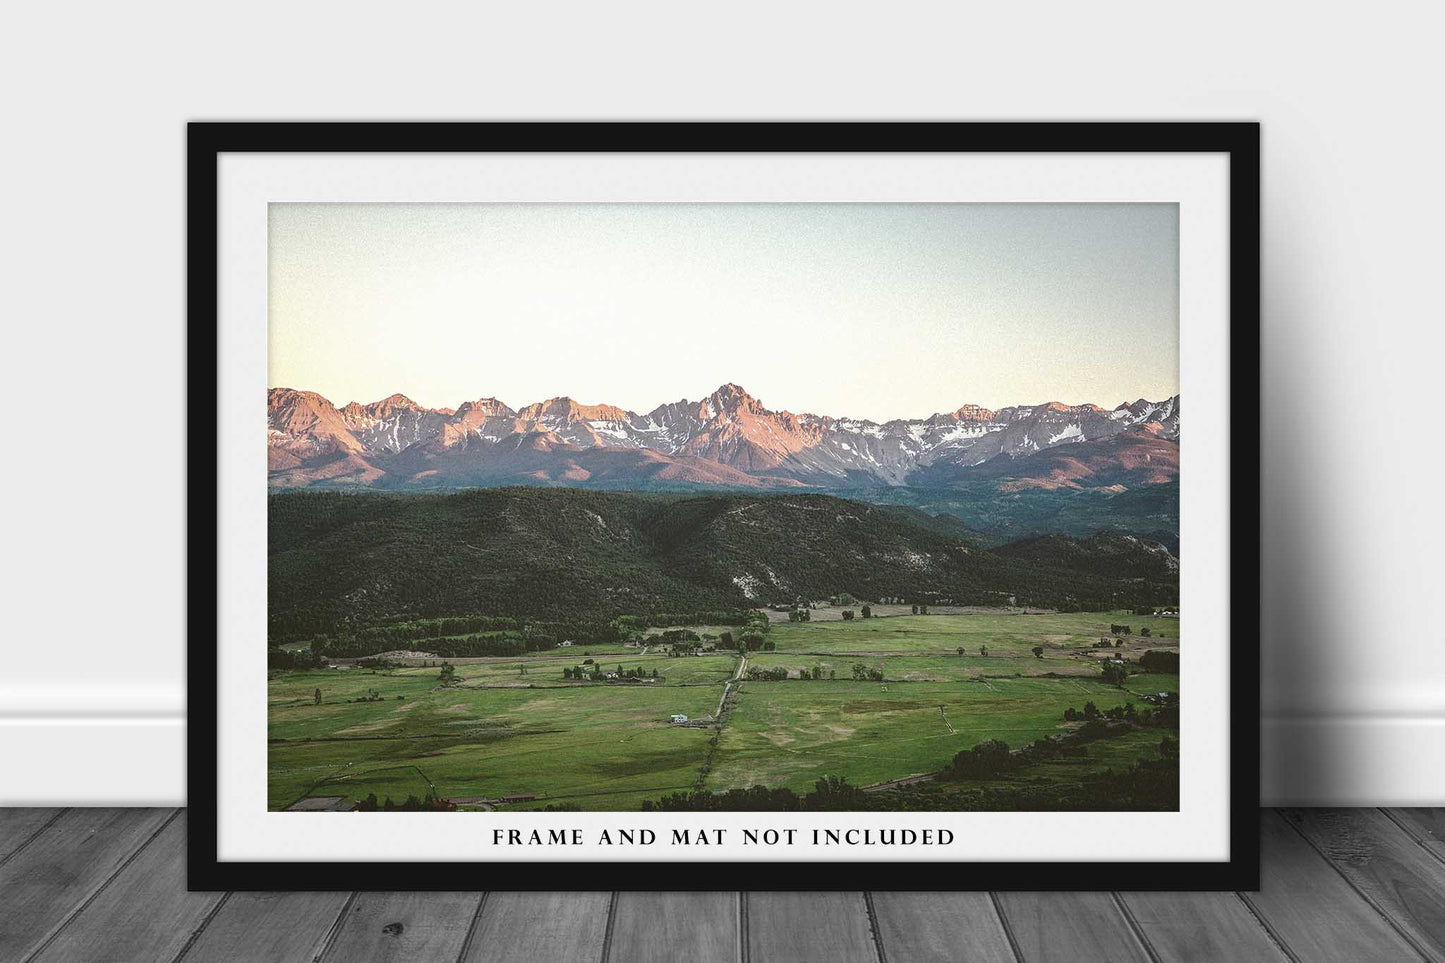 Rocky Mountain Photography Print (Not Framed) Picture of Mount Sneffels in Colorado San Juans Wall Art Western Decor